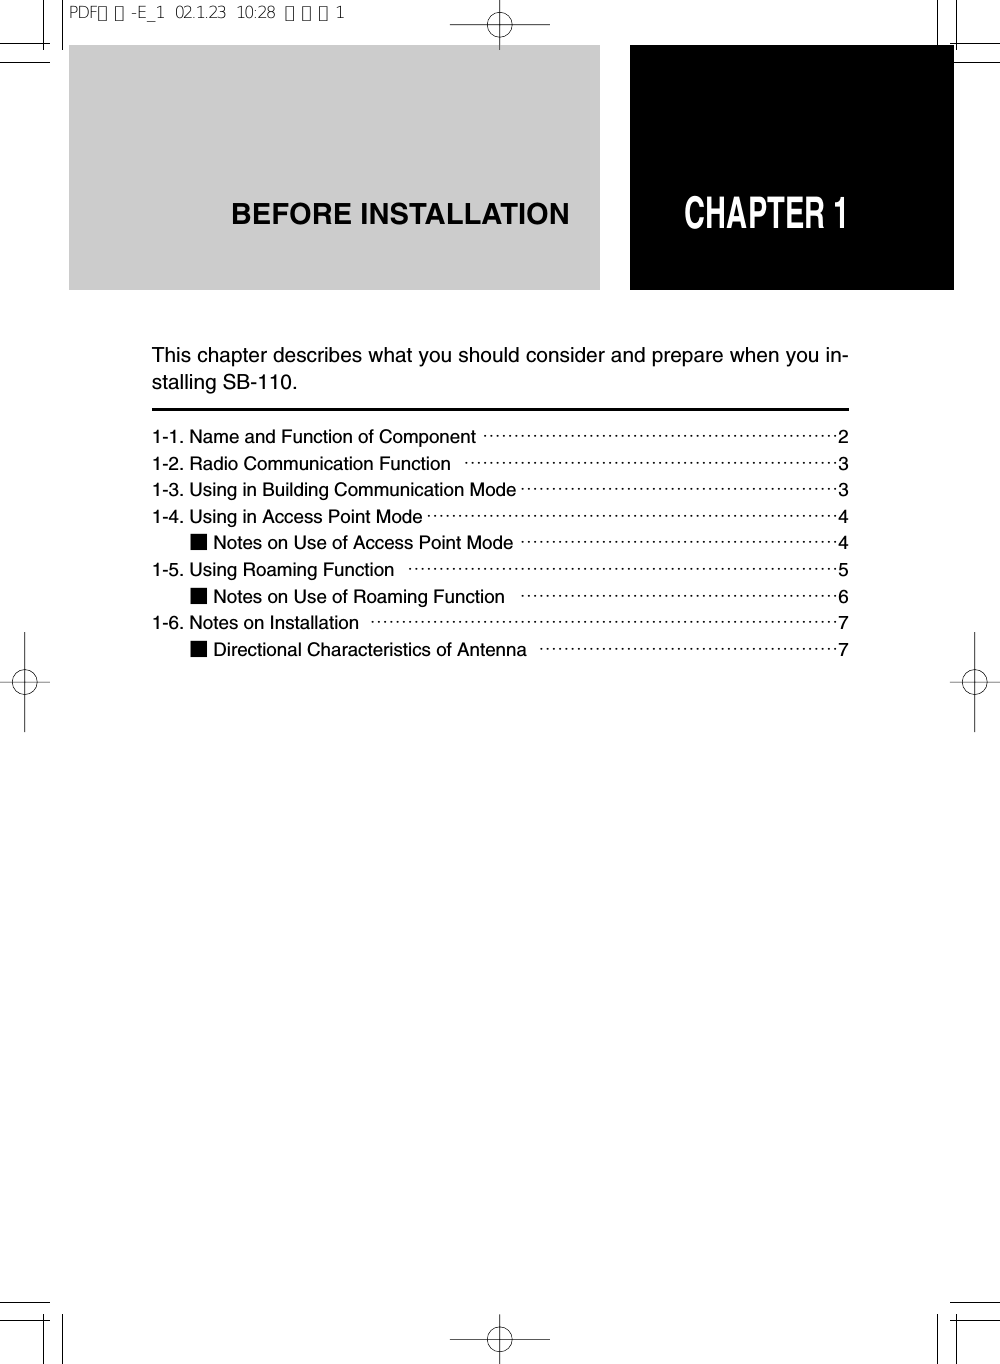 CHAPTER 1BEFORE INSTALLATION1-1. Name and Function of Component …………………………………………………21-2. Radio Communication Function ……………………………………………………31-3. Using in Building Communication Mode ……………………………………………31-4. Using in Access Point Mode …………………………………………………………4■Notes on Use of Access Point Mode ……………………………………………41-5. Using Roaming Function ……………………………………………………………5■Notes on Use of Roaming Function ……………………………………………61-6. Notes on Installation …………………………………………………………………7■Directional Characteristics of Antenna …………………………………………7This chapter describes what you should consider and prepare when you in-stalling SB-110.PDF取説-E_1  02.1.23  10:28  ページ1